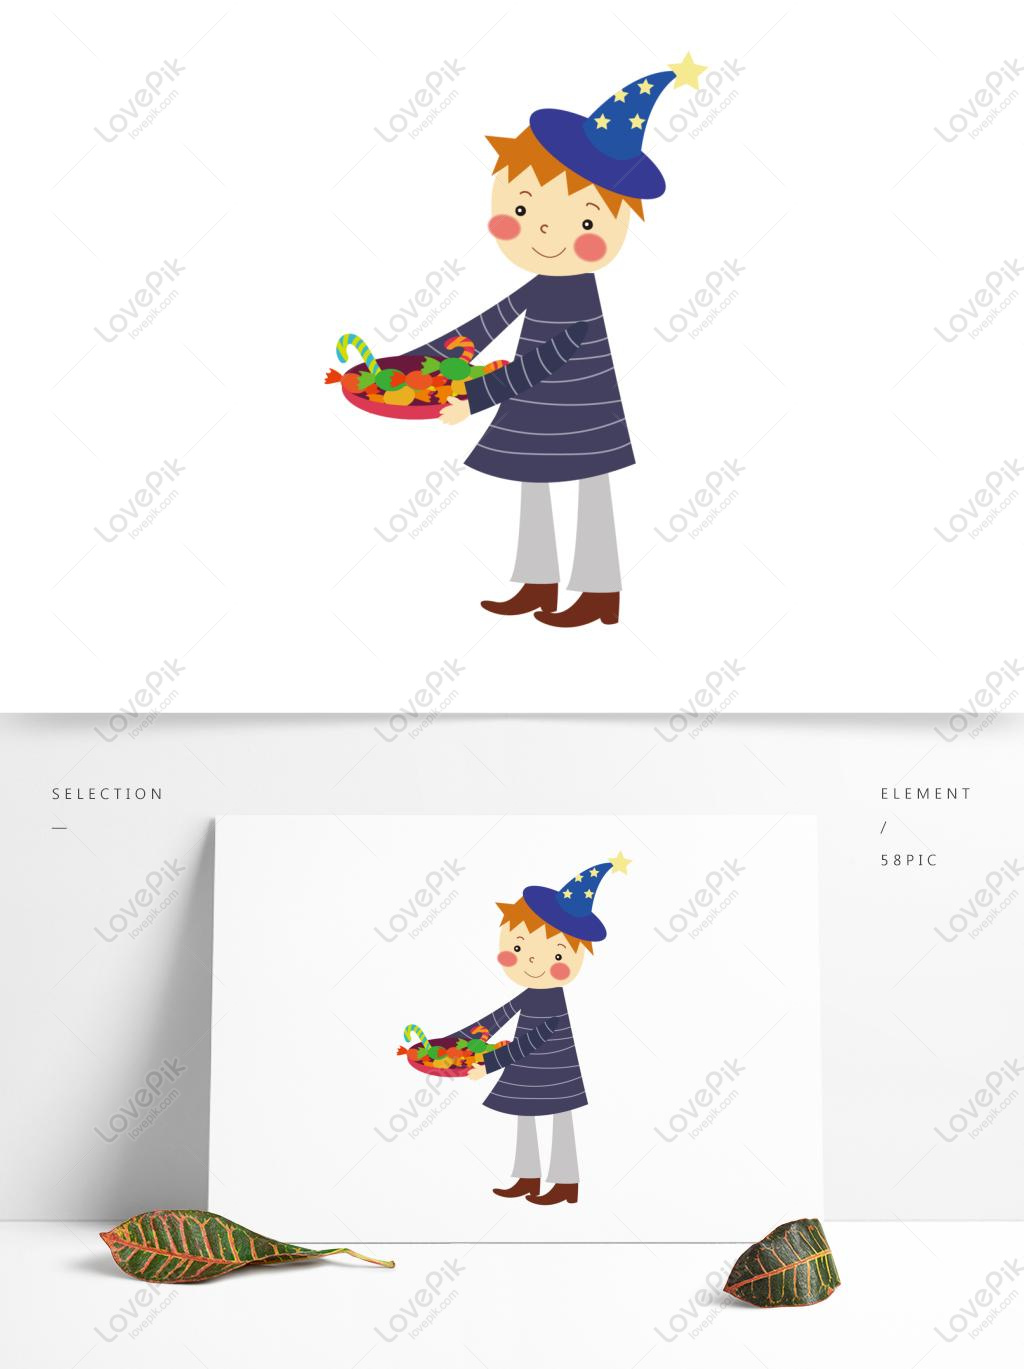 Hand Drawn Cartoon Halloween Boy Sharing Candy Can Be Commercial PNG Hd  Transparent Image AI images free download_1369 × 1024 px - Lovepik